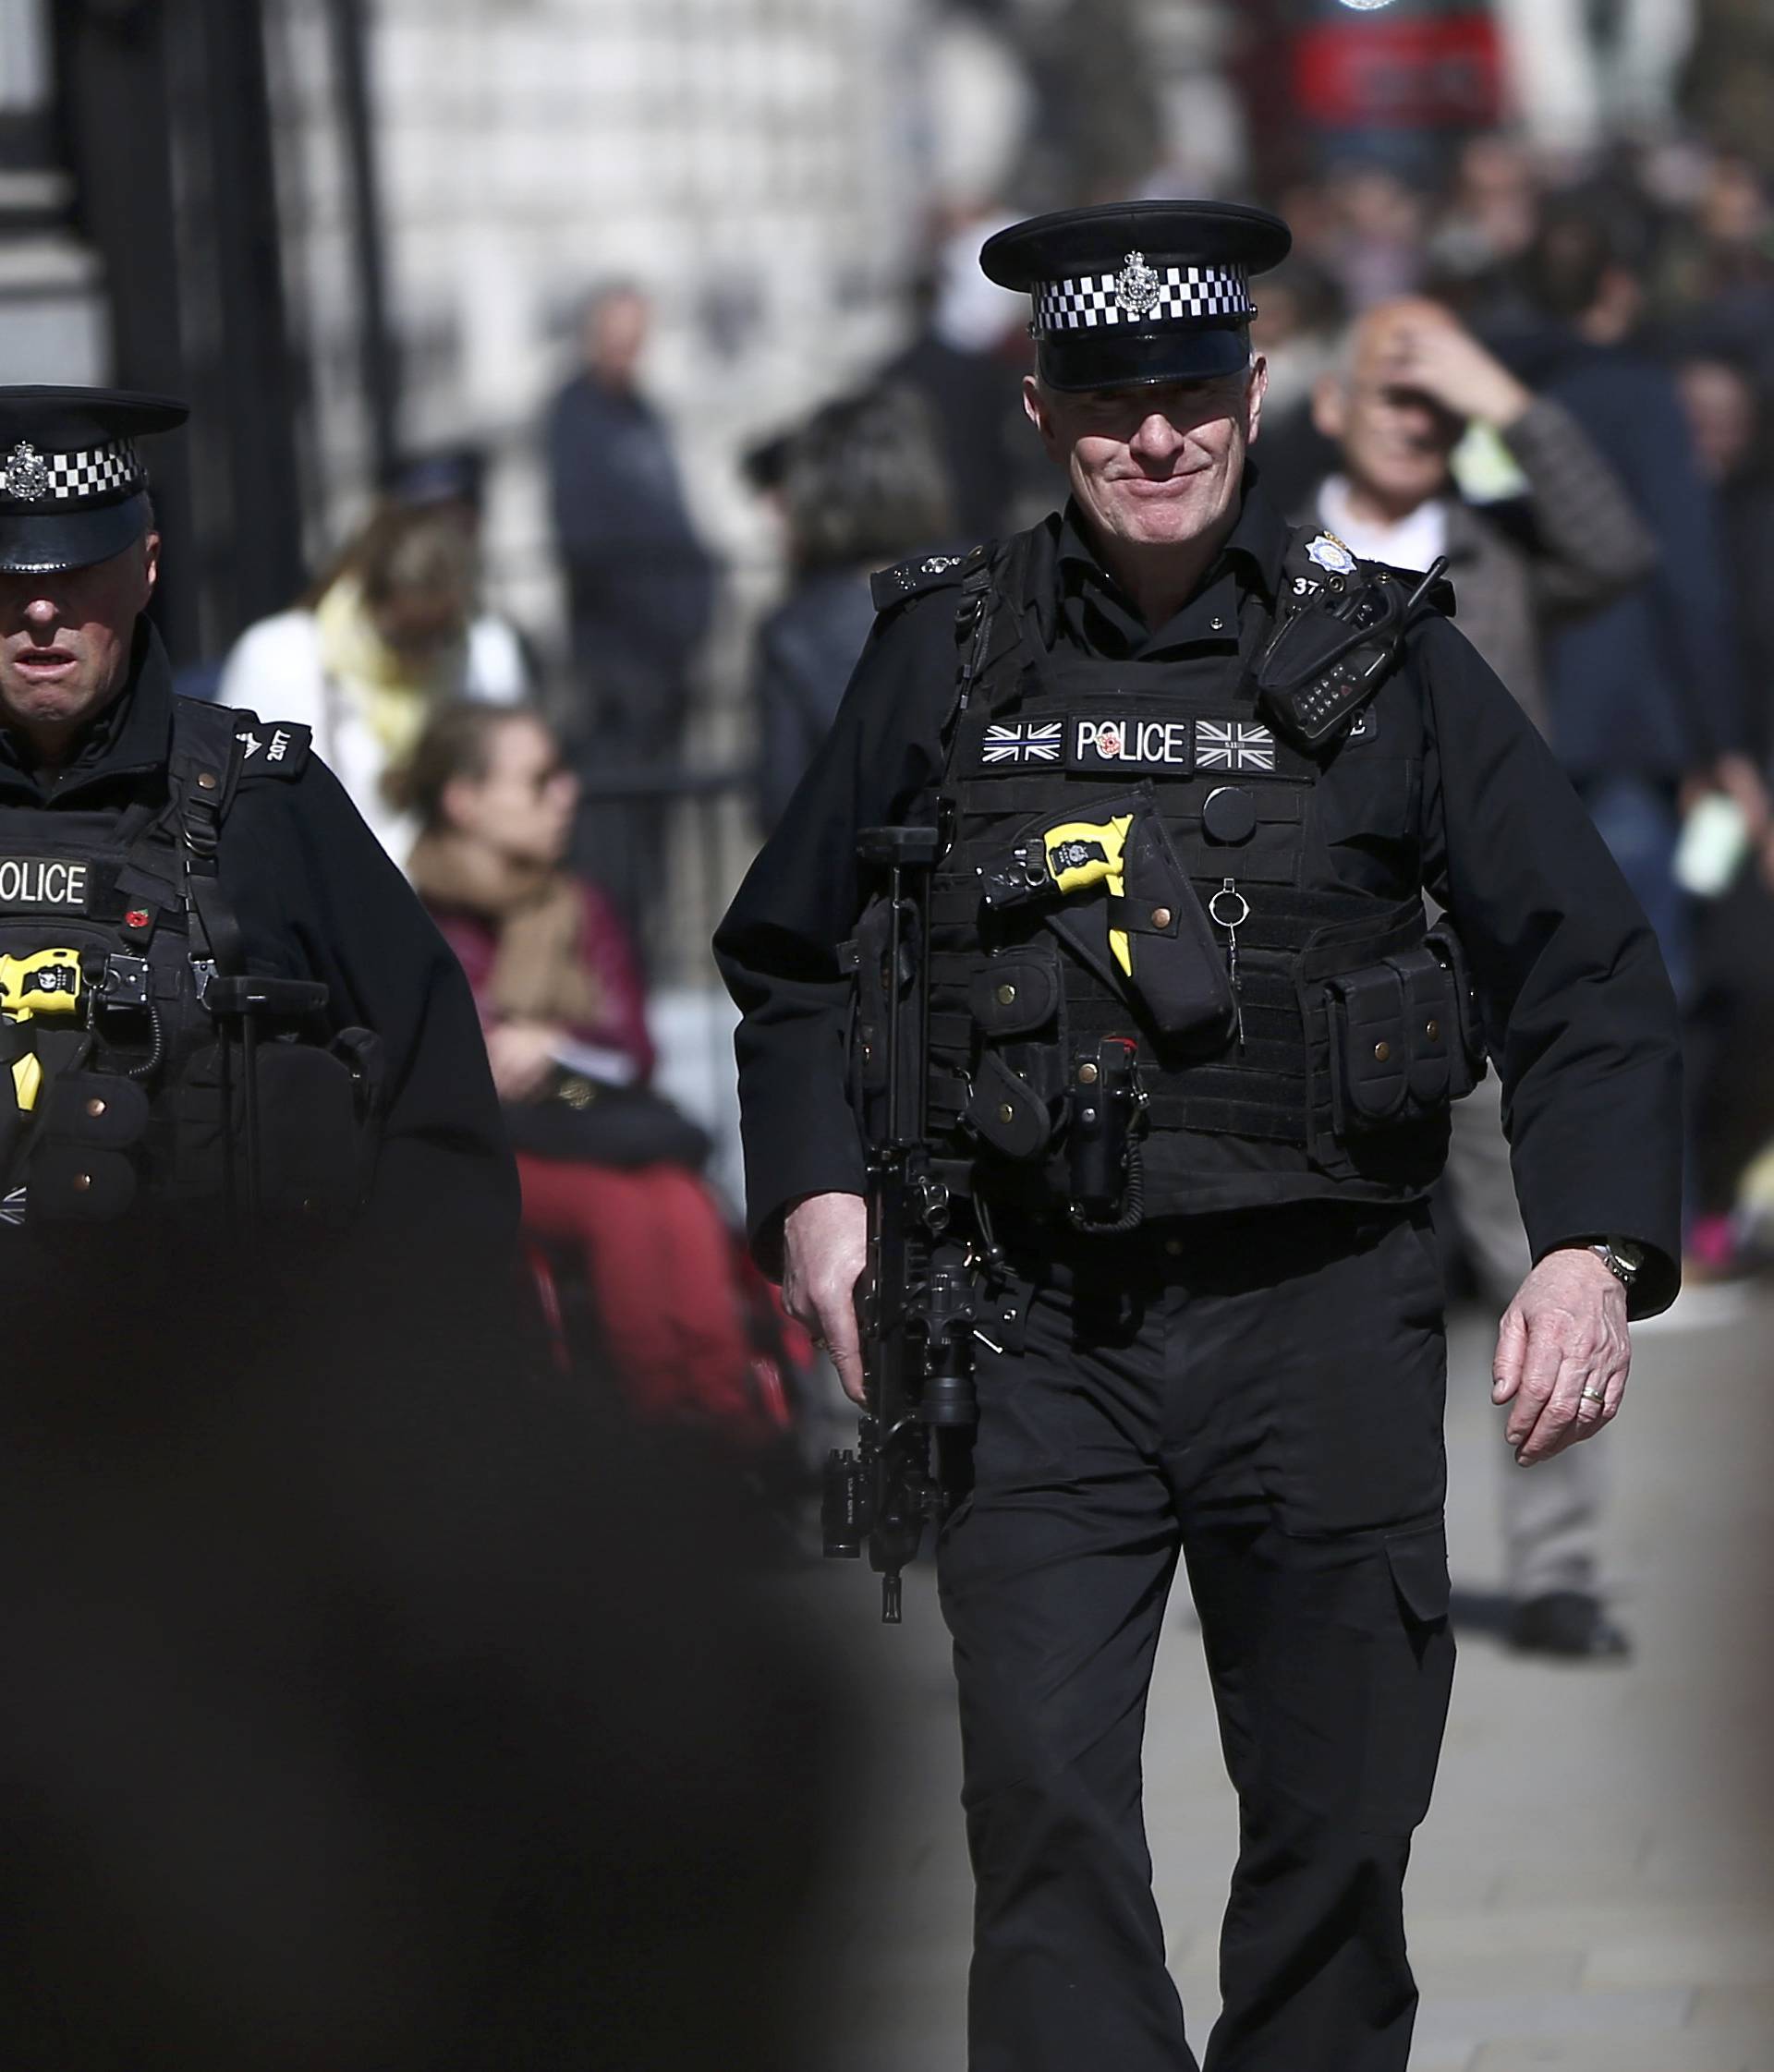 Armed police patrol the streets following the attack in Westminster earlier in the week, in central London